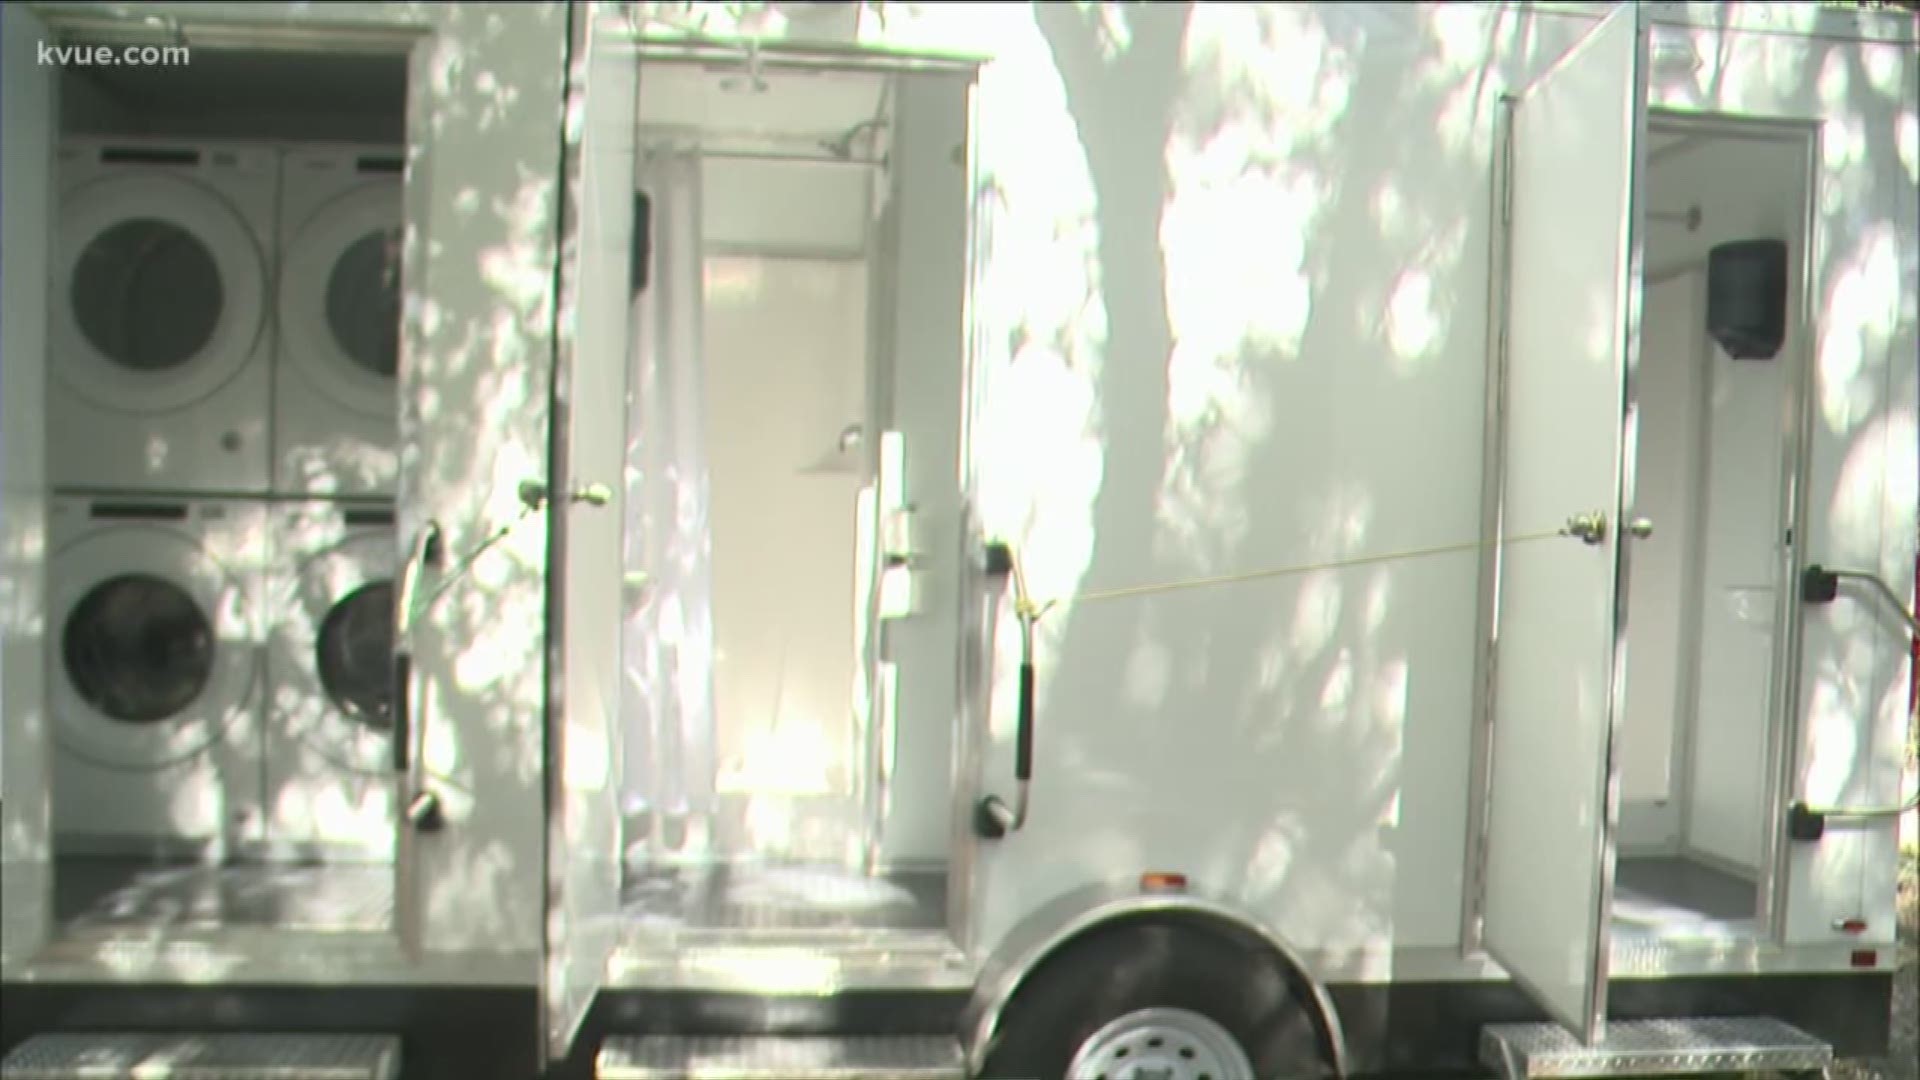 Austin's first mobile shower trailer company just got its own unit.